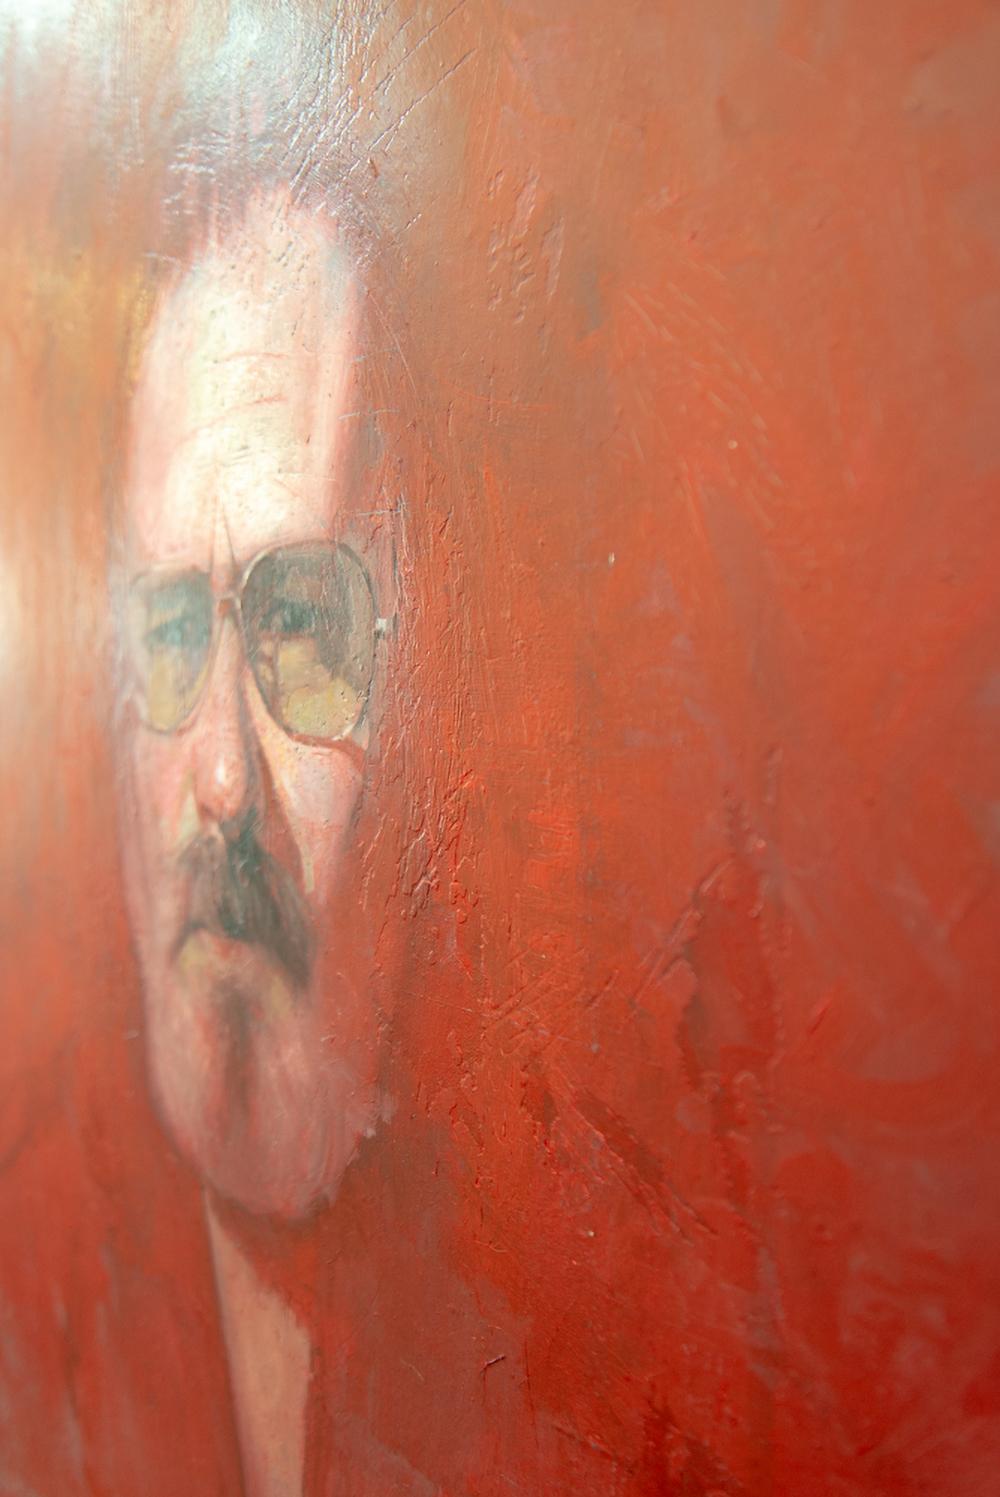 In this haunting self-portrait by Canadian realist Dan Hughes, the artist’s face seems to emerge from a rich red background. Hughes is known for his sensitive and engaging figurative work and expressive use of colour. Here, the artist is looking